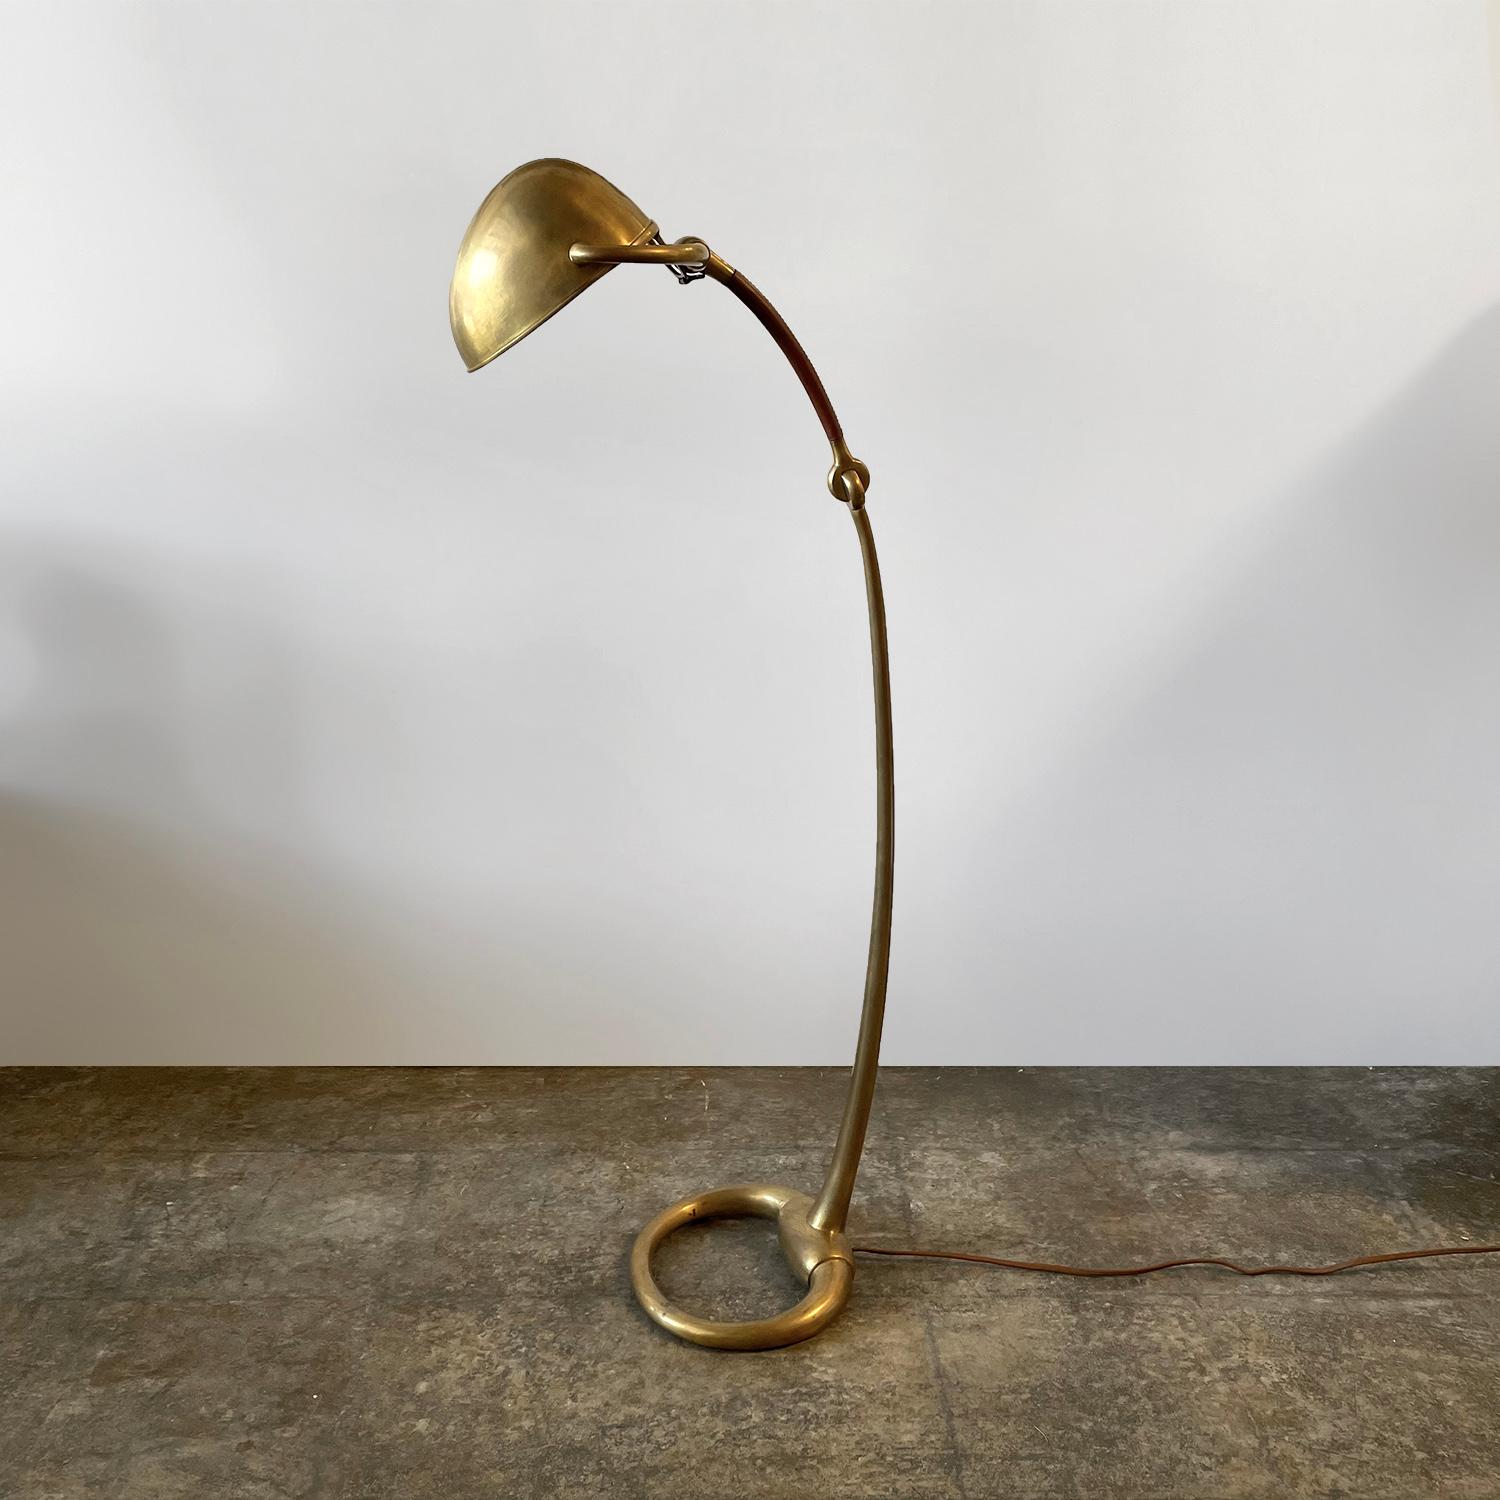 Ralph Lauren brass & leather floor lamp
Equestrian inspired piece
Brass helmet shade articulates to two positions - see photos
Mirrored interior beautifully reflects and illuminates light
Top portion of the brass stem is wrapped in rich saddle